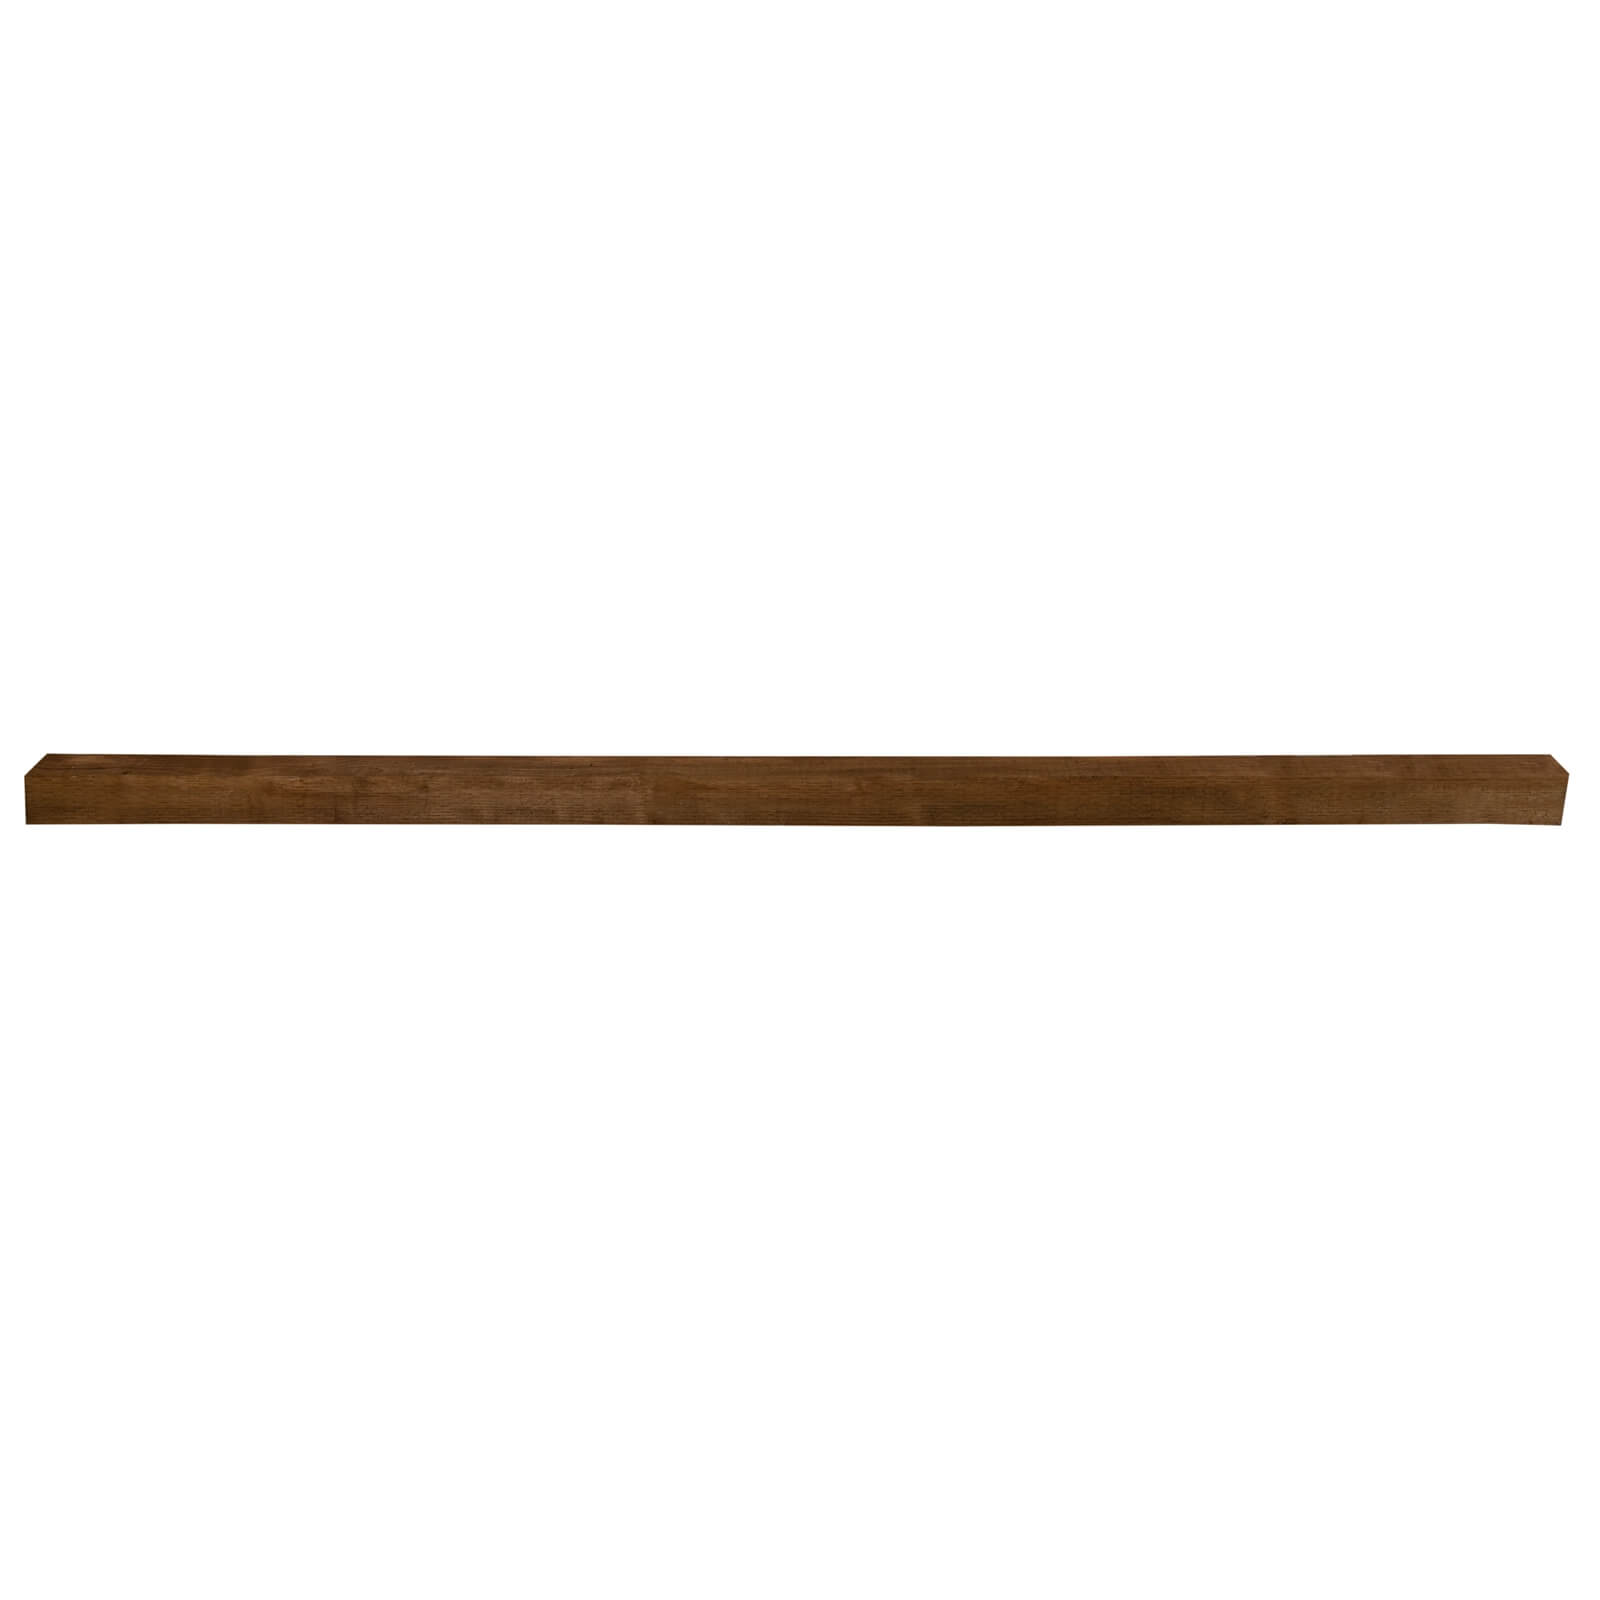 Brown Incised Fence Post 2.4m (2400 x 75 x 75mm) - Pack of 4